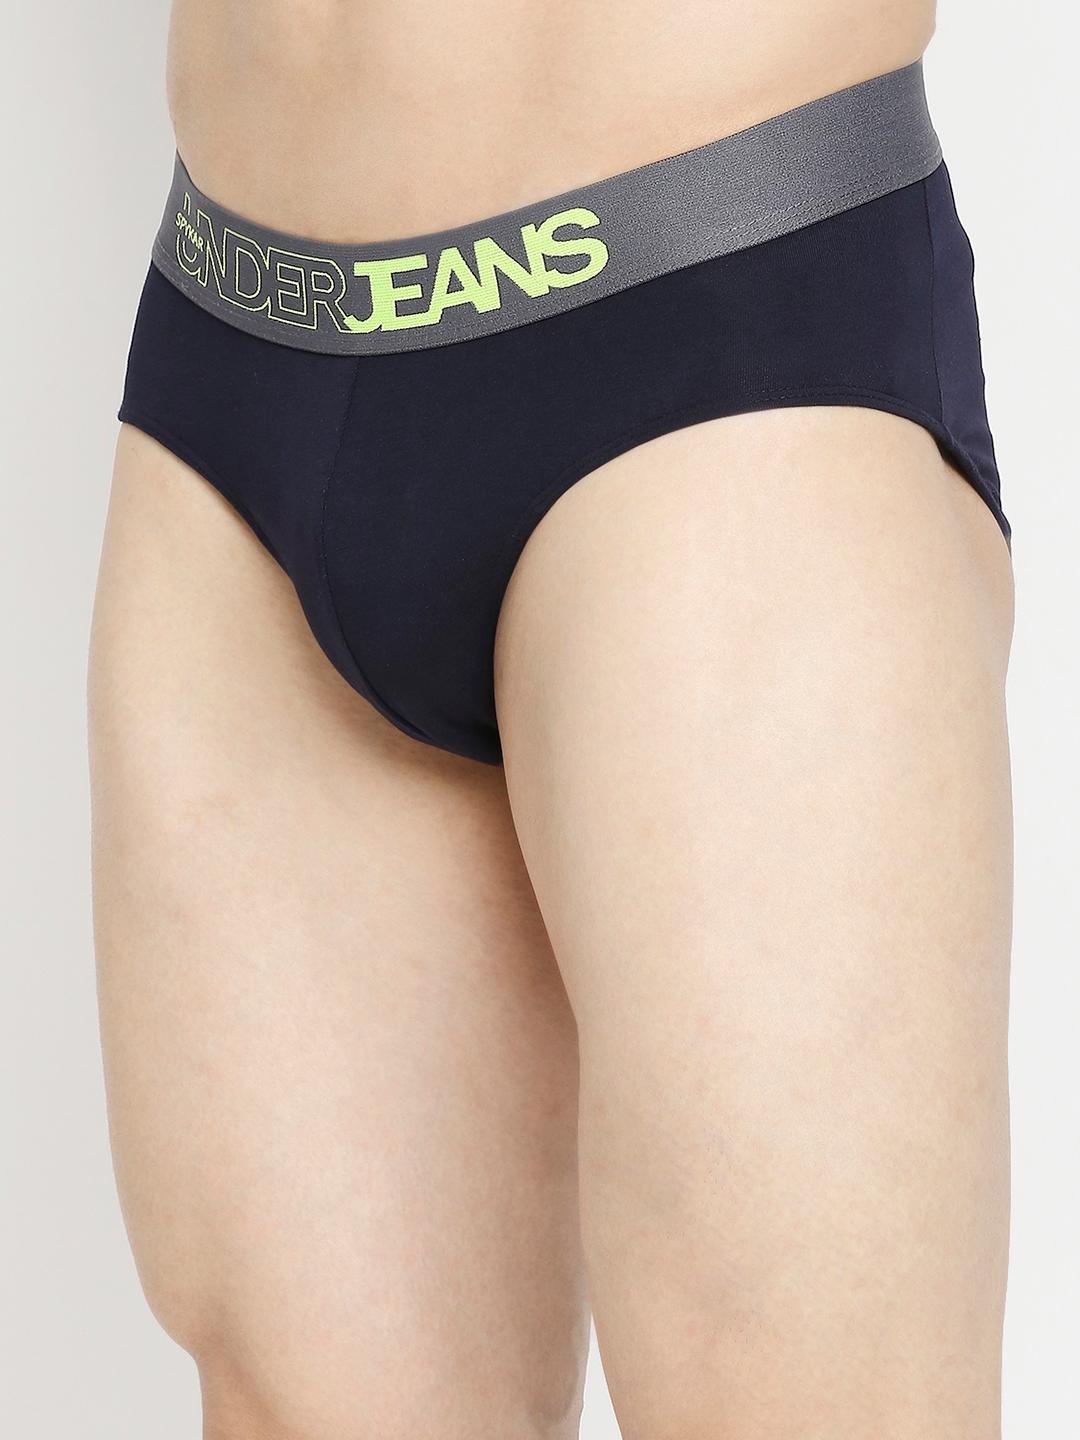 Underjeans By Spykar Navy Blue & Olive Cotton Blend Brief - Pack Of 2